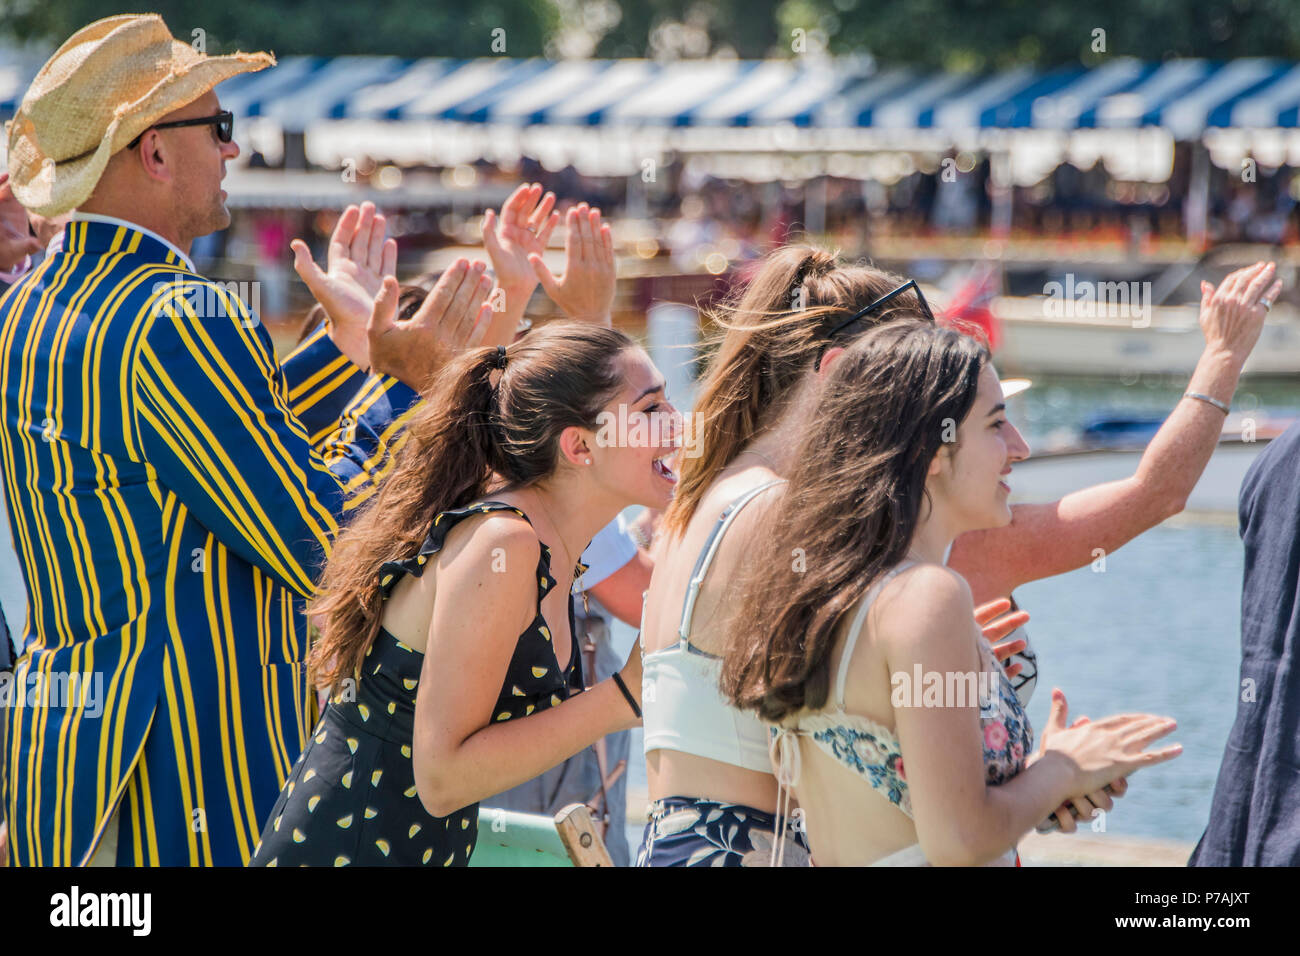 Henley on Thames, UK. 5th July, 2018. The crowd in the stewards enclosure gets very excited  as a Latymer Upper D Four passes. It was the first ever J16 boat to qualify for the senior races at Henley - Henley Royal Regatta. Credit: Guy Bell/Alamy Live News Stock Photo